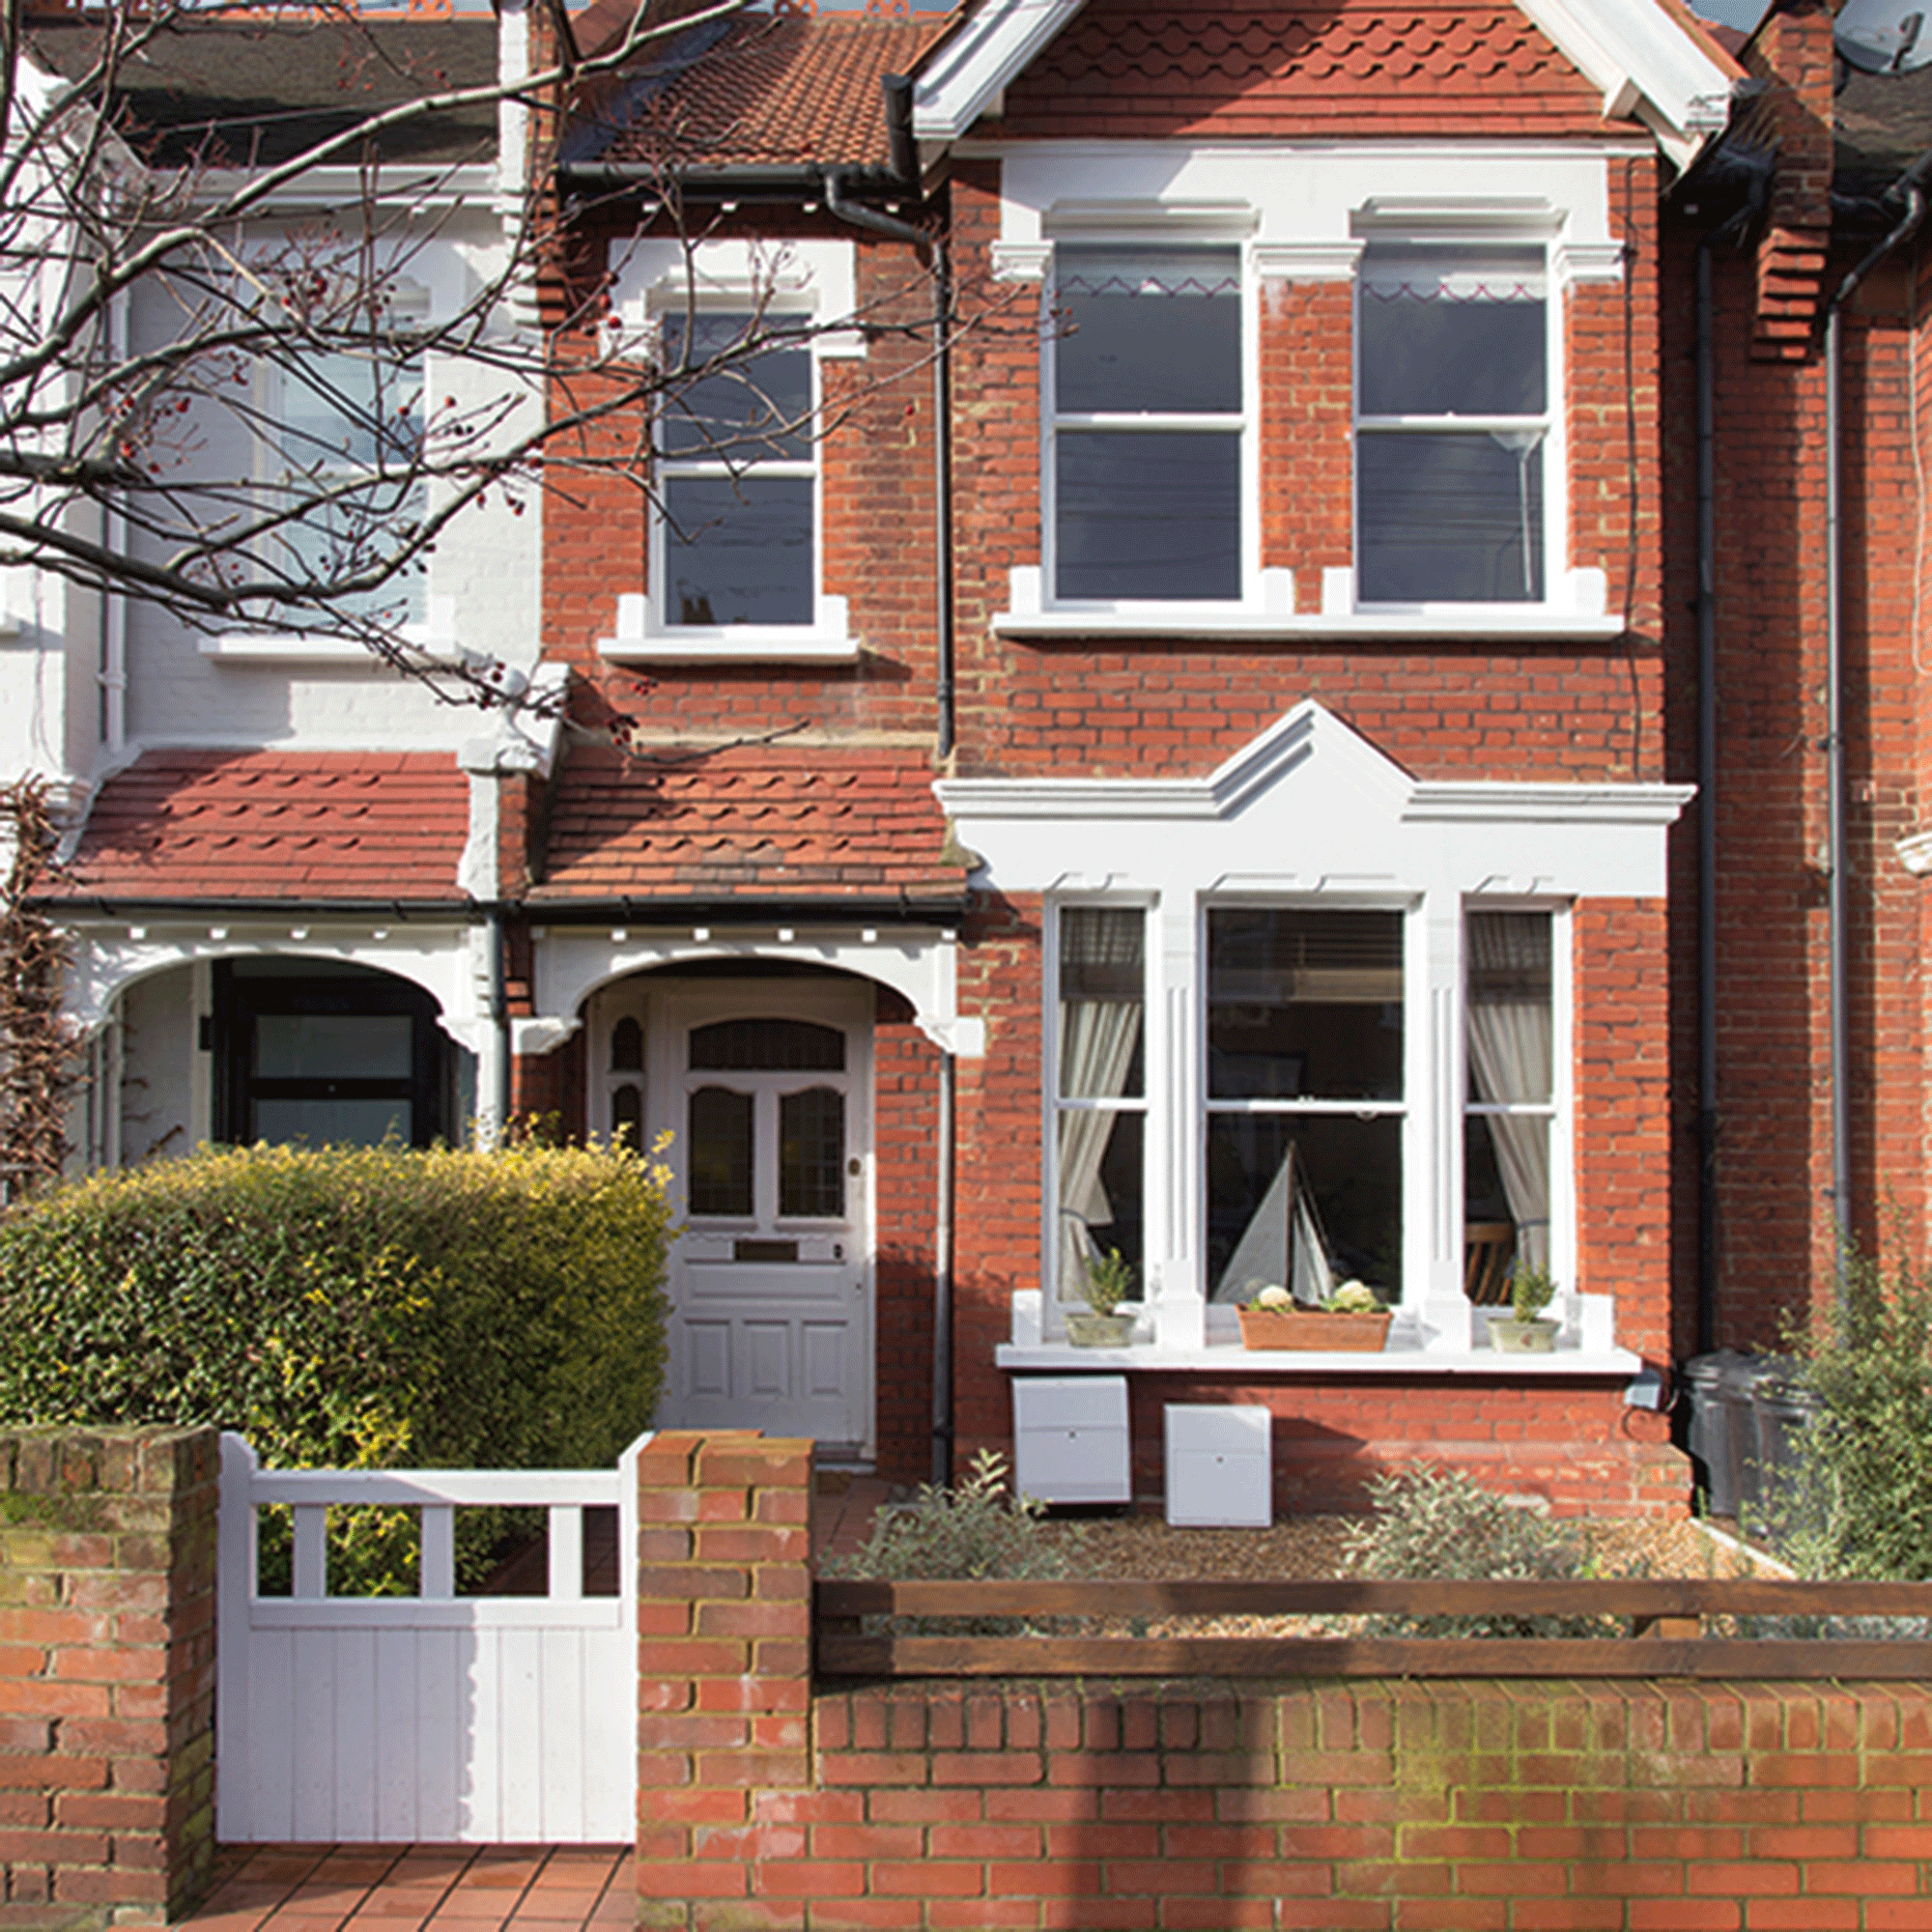 Red brick house with white trim